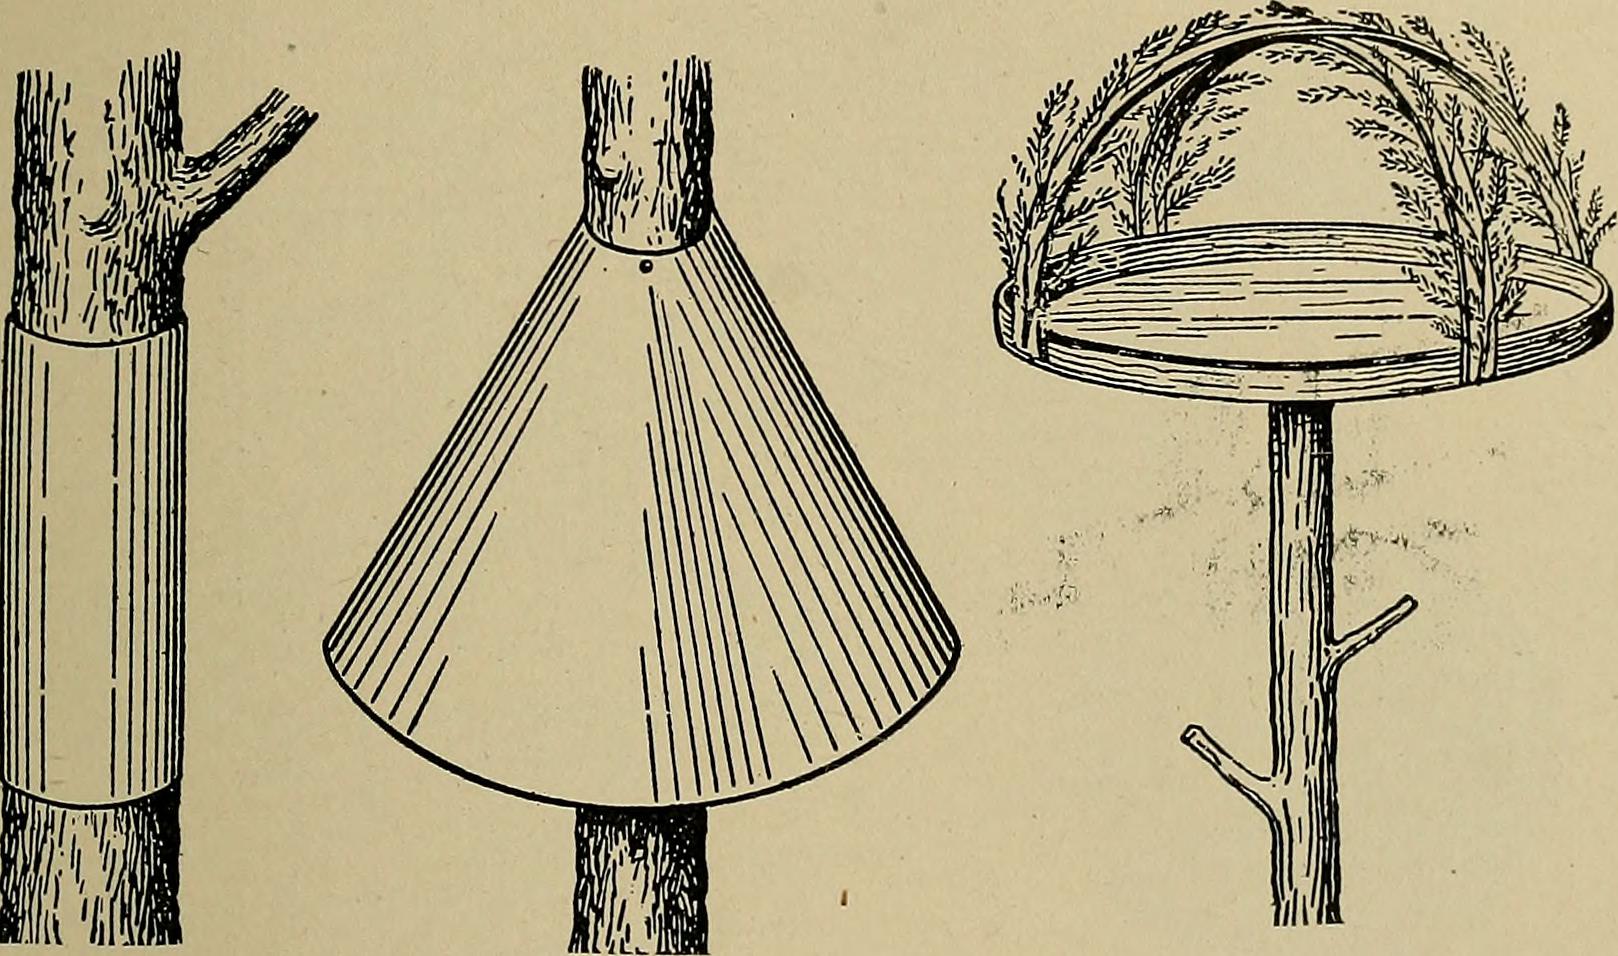 Image from page 398 of "Horticulture; a text book for high schools and normals, including plant propagation; plant breeding; gardening; orcharding; small fruit growing; forestry; beautifying home grounds; the soils and enemies involved" (1919)